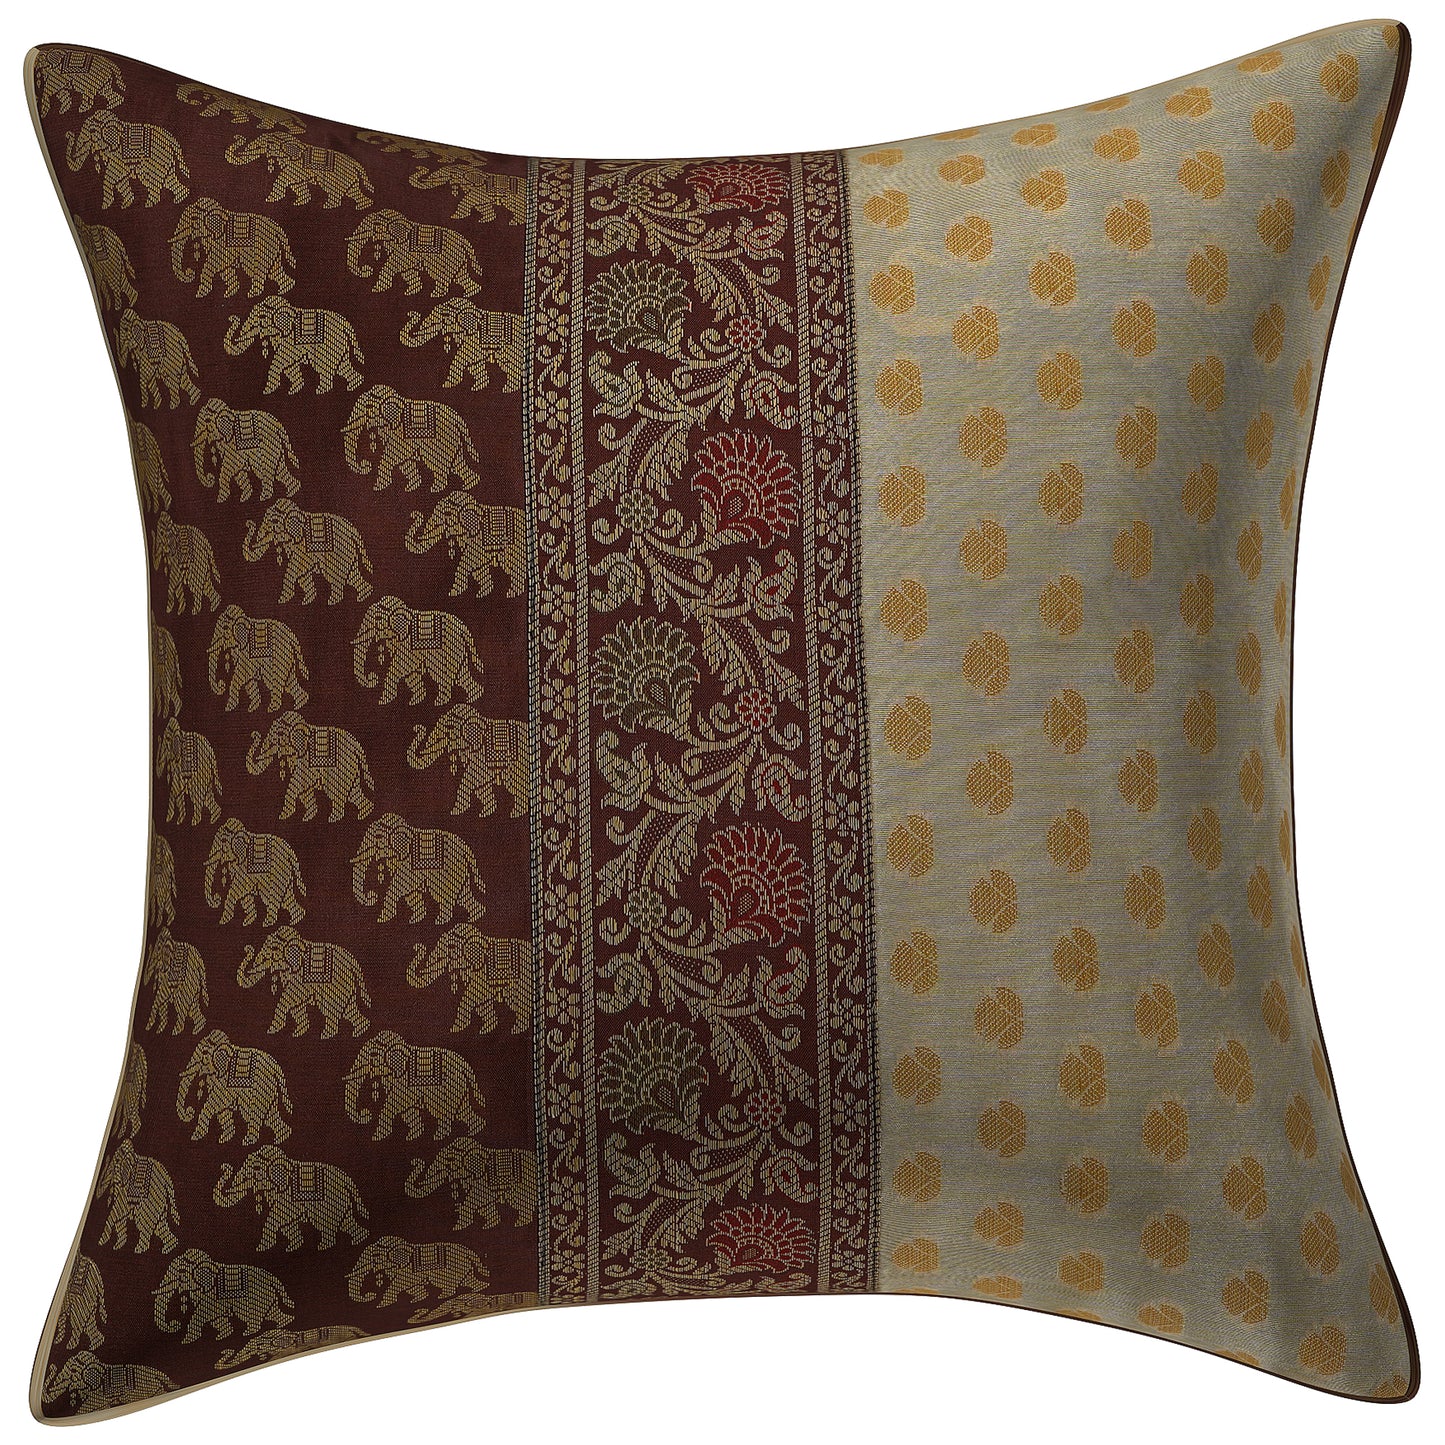 Indian Ethnic Brocade Silk Off White & Brown Elephant cushion Cover Throw Pillow for Couch Sofa Home Décor Pillow Cover 16X16 In Set 2 Pc